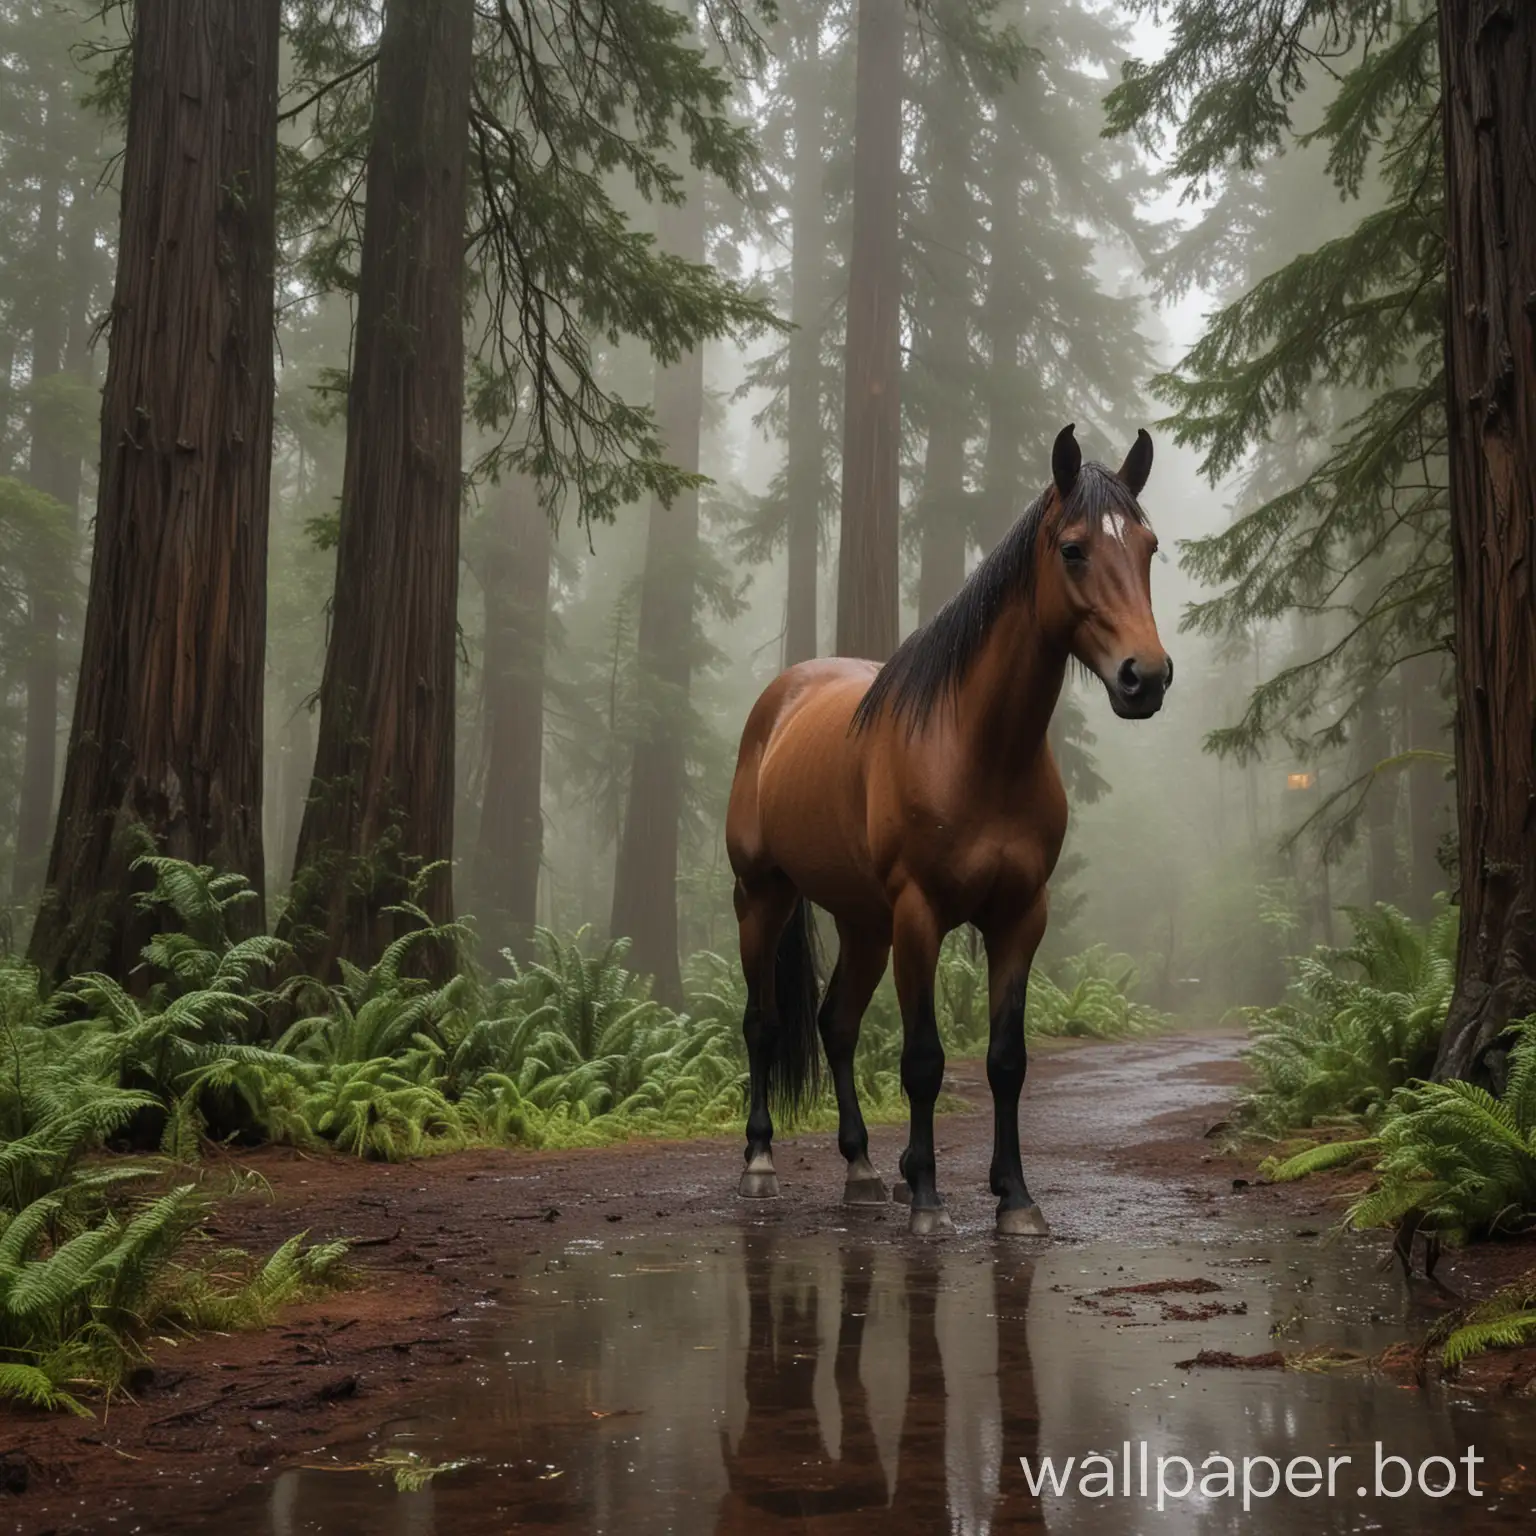 Horse in a redwood forest on a rainy day